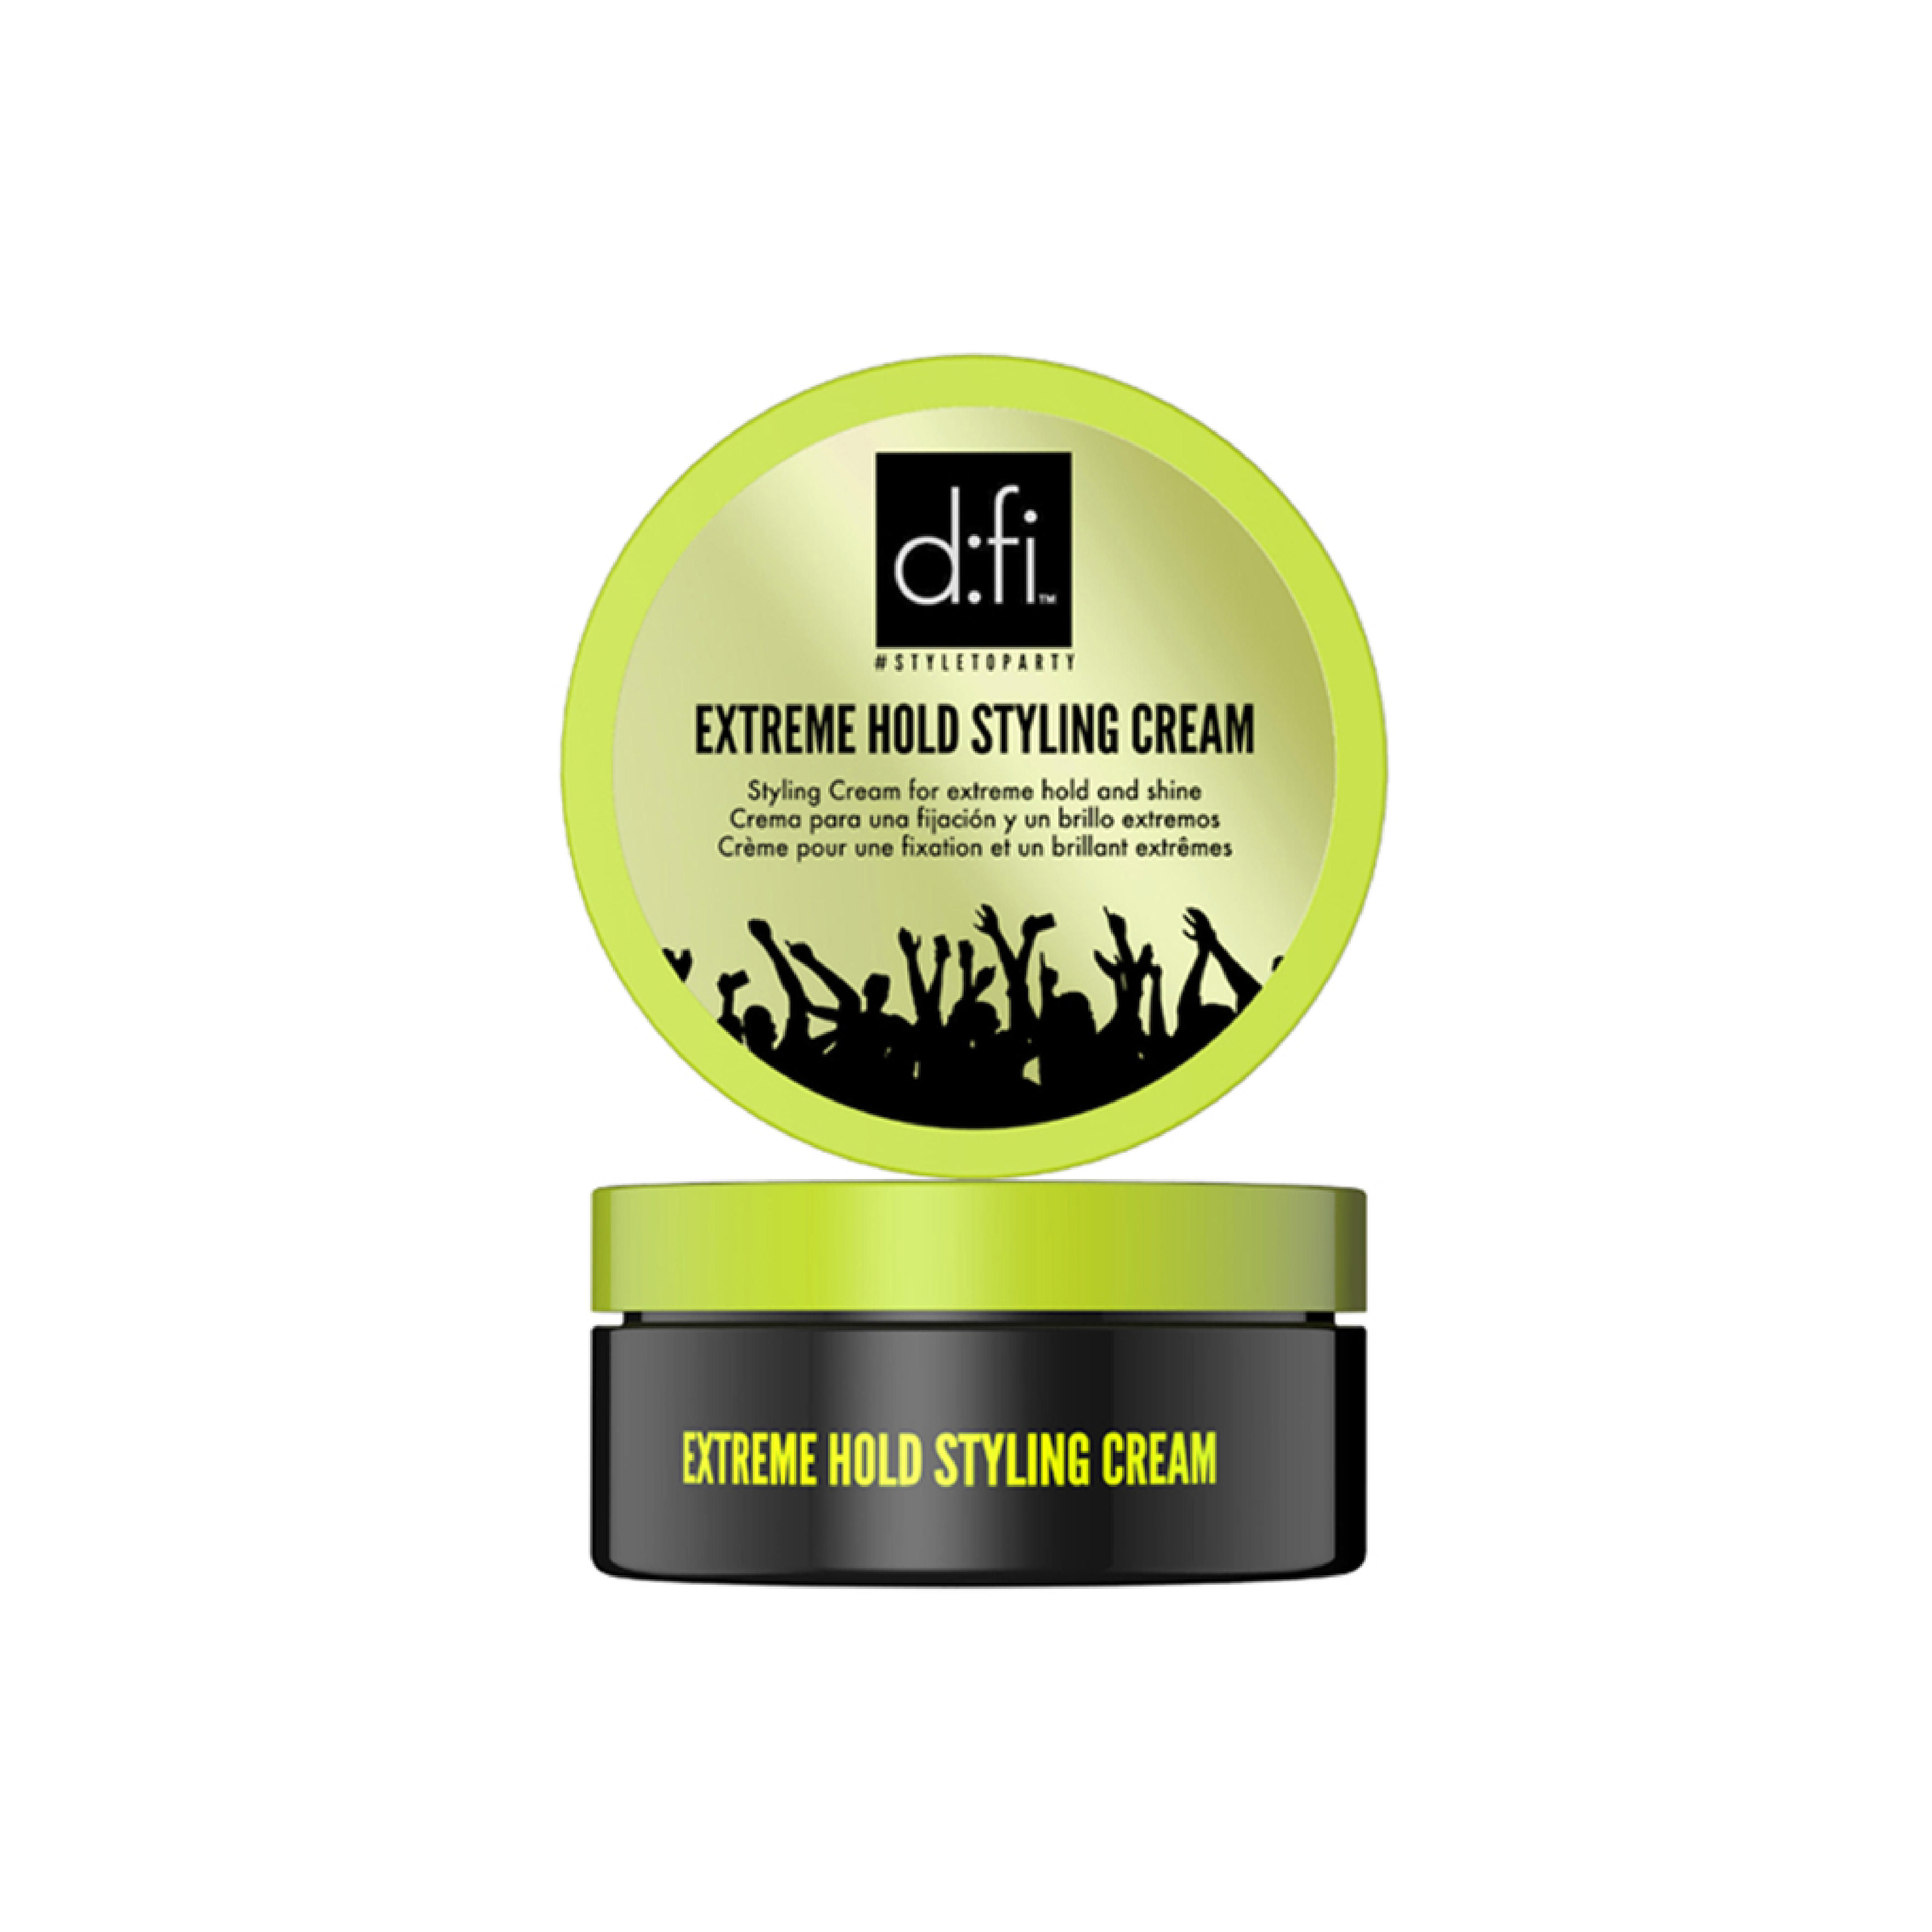 Dfi Extreme Hold Styling Cream - 75g